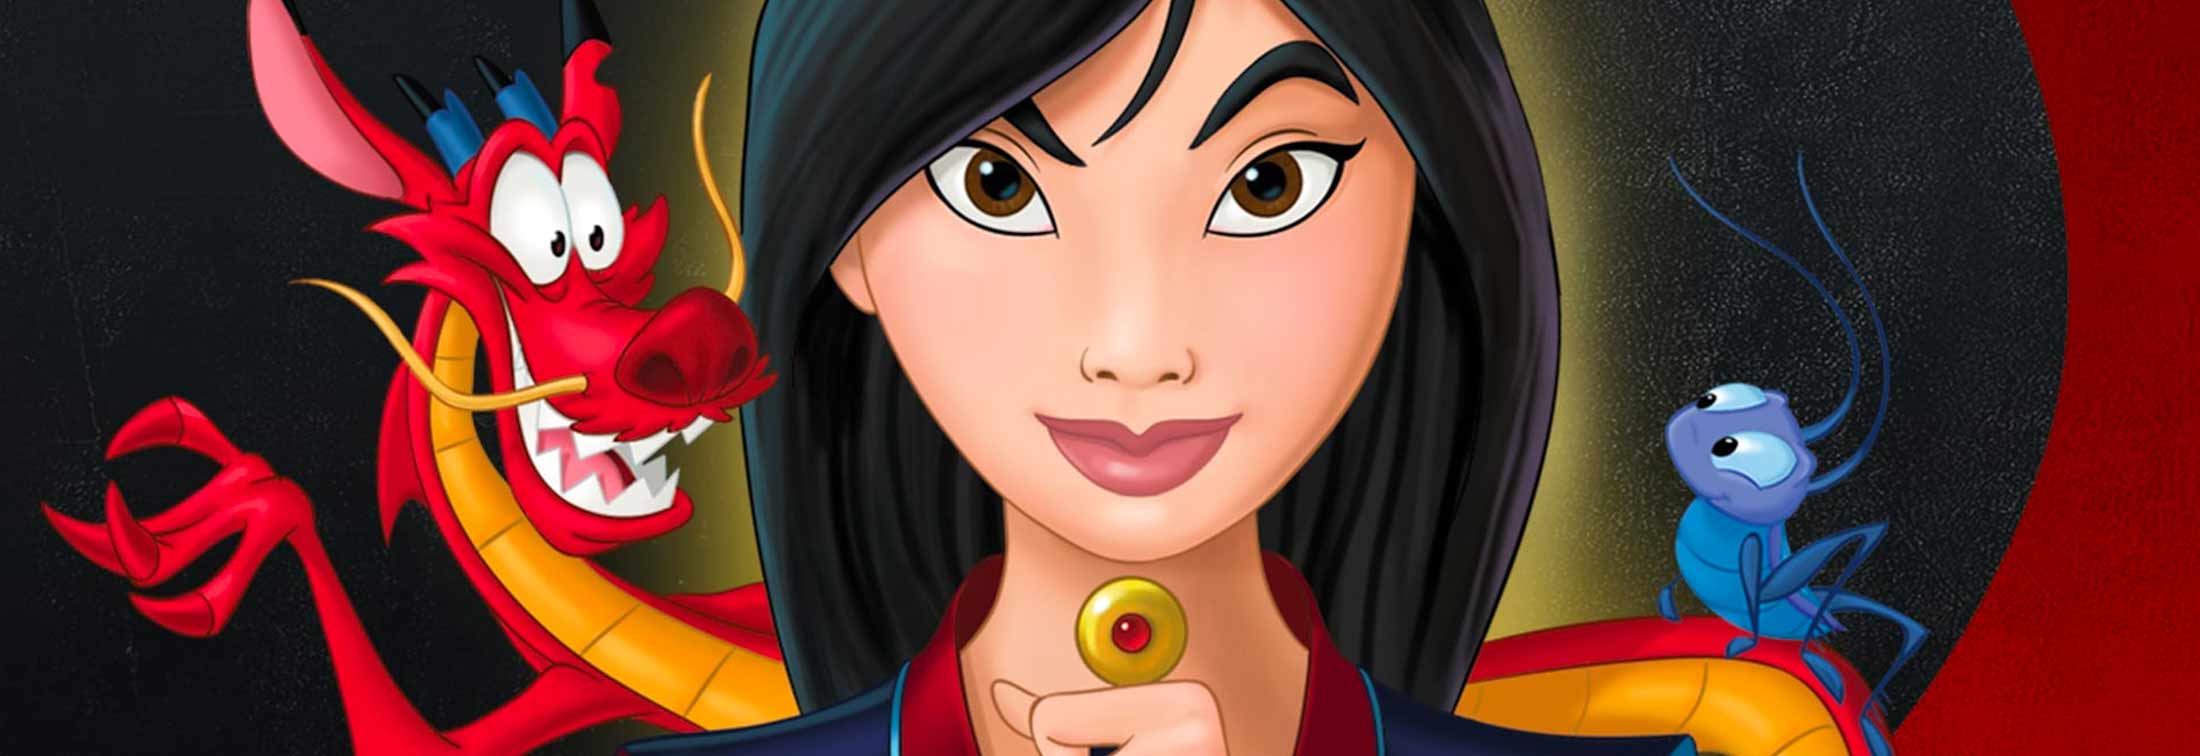 Mulan Review: A timeless empowering character 25 years down the road, Retrospective Review